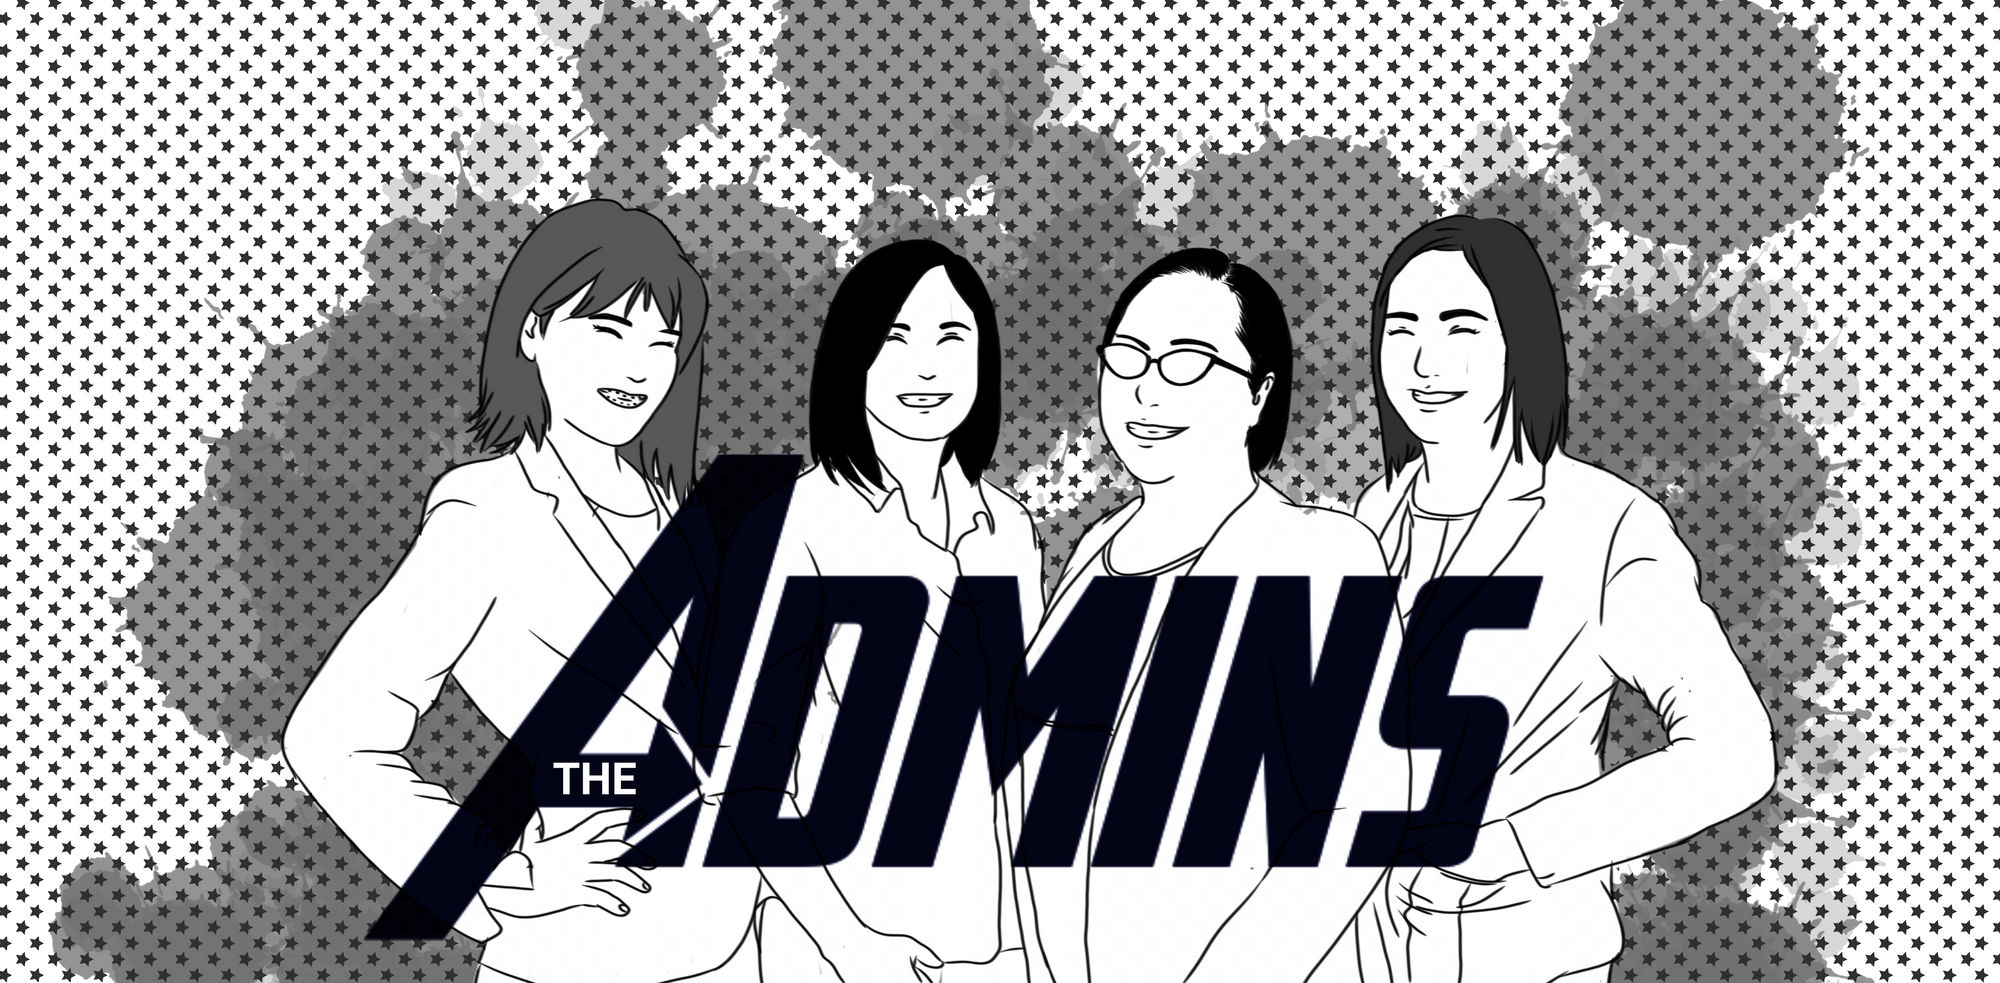 Episode 2: The Admins